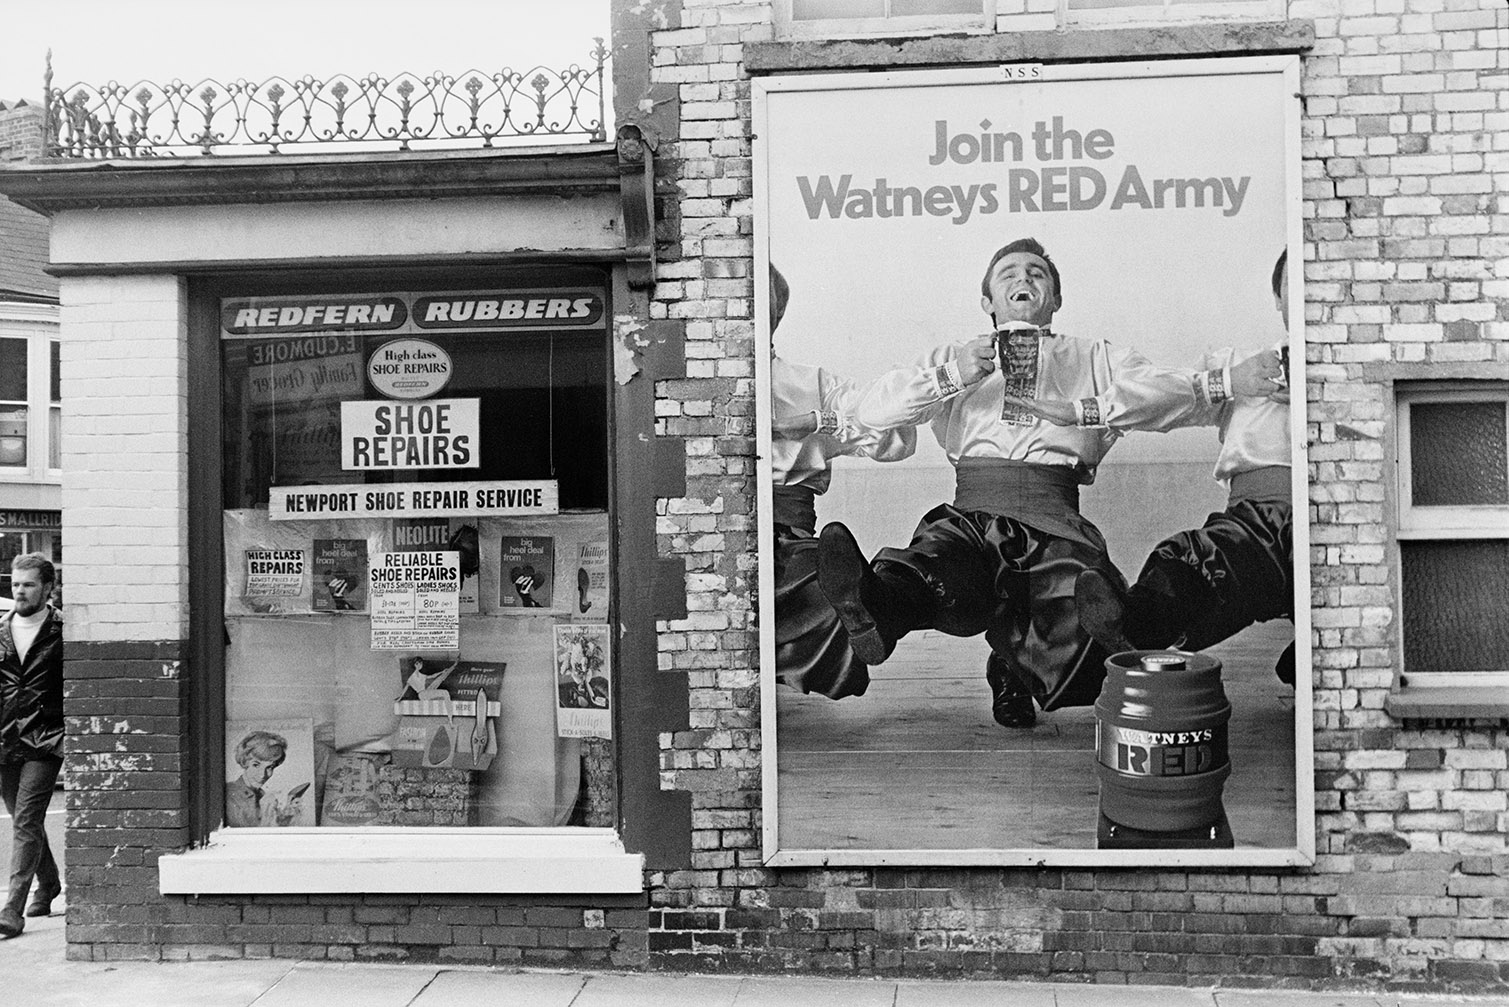 An advertising board on the outside wall of a shoe repair shop in Barnstaple. The board is advertising Watneys beer and reads 'Join the Watneys RED Army'.